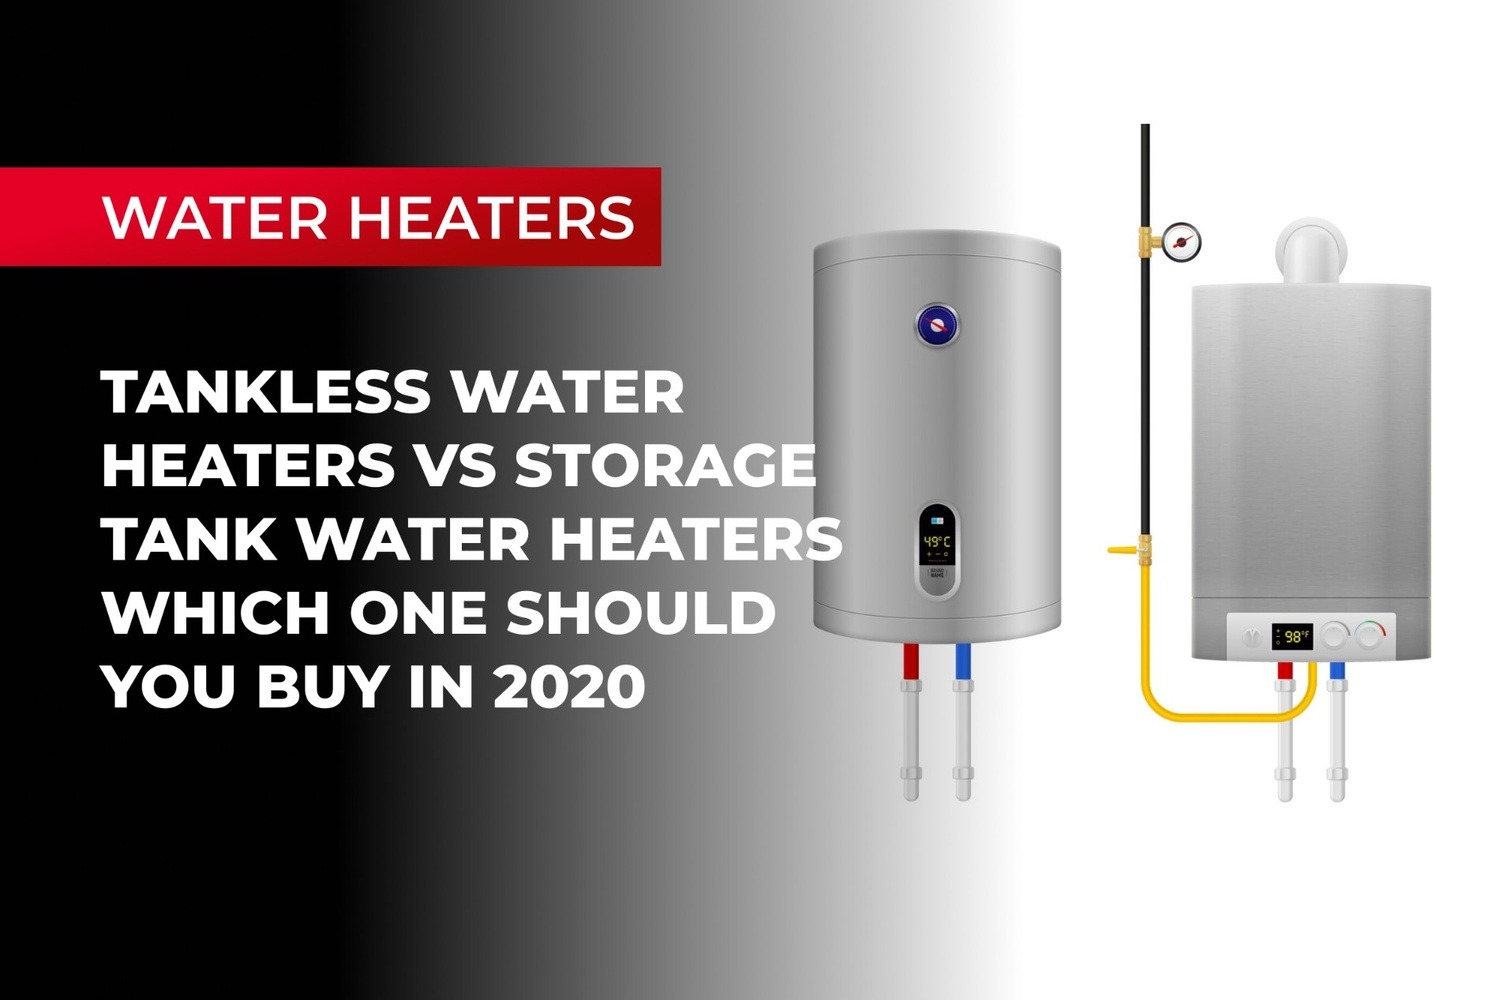 Tankless Water Heaters vs Storage Tank Water Heaters – Which One Should You Buy in 2020?